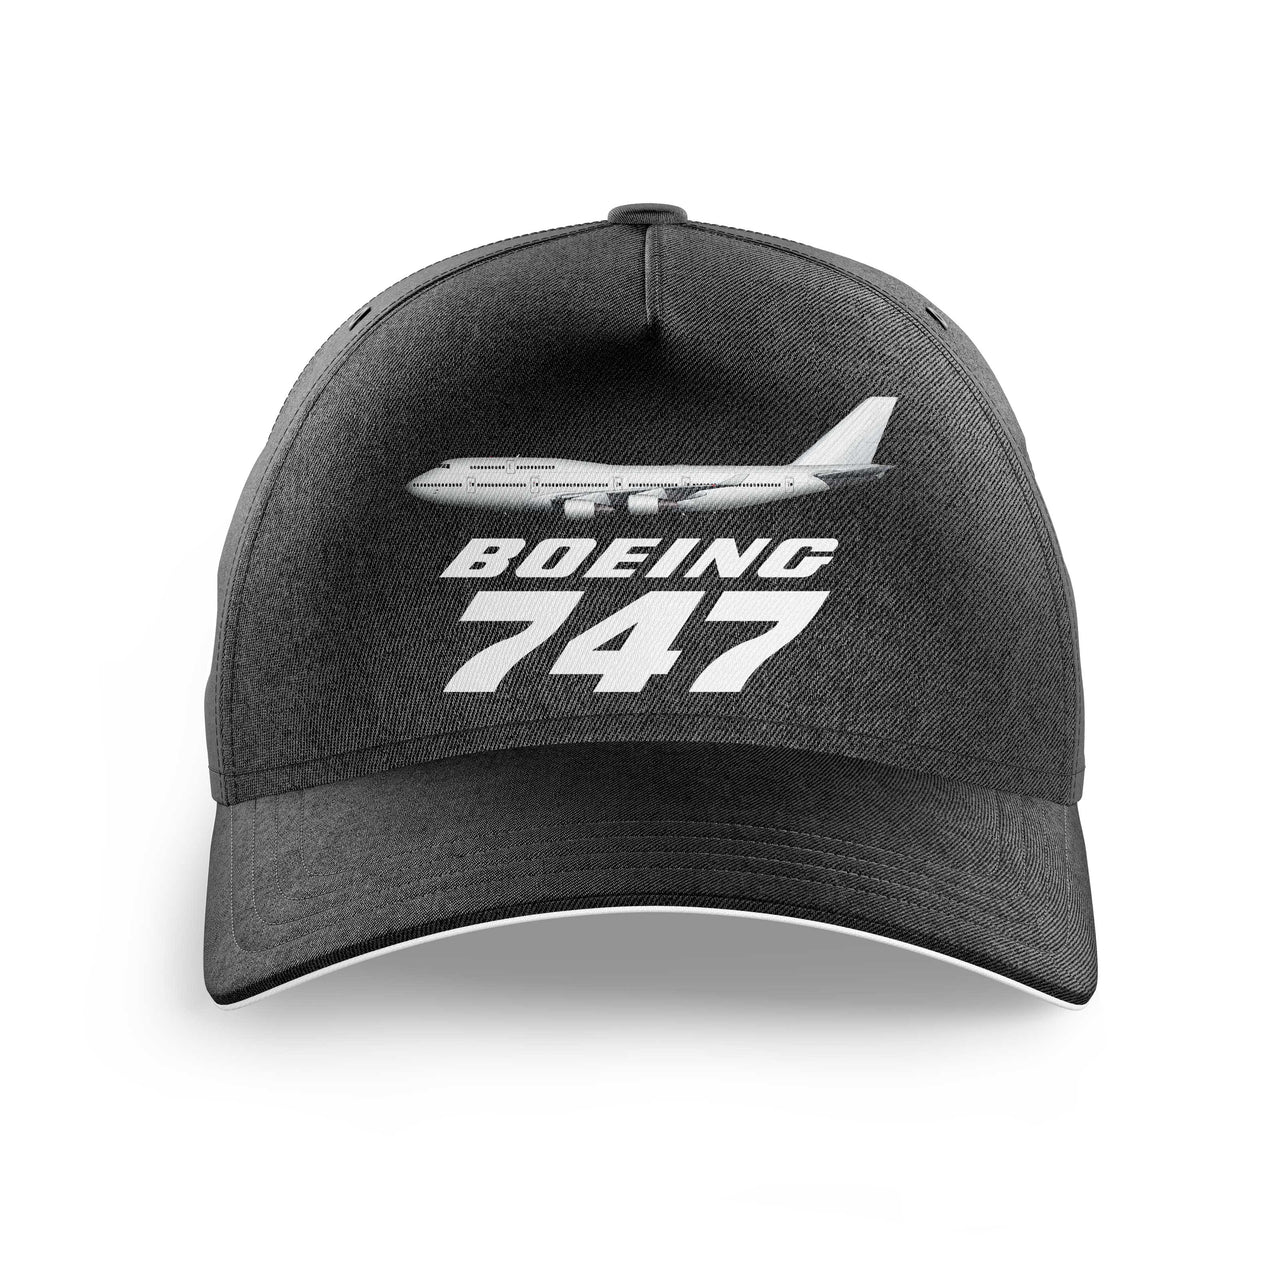 The Boeing 747 Printed Hats